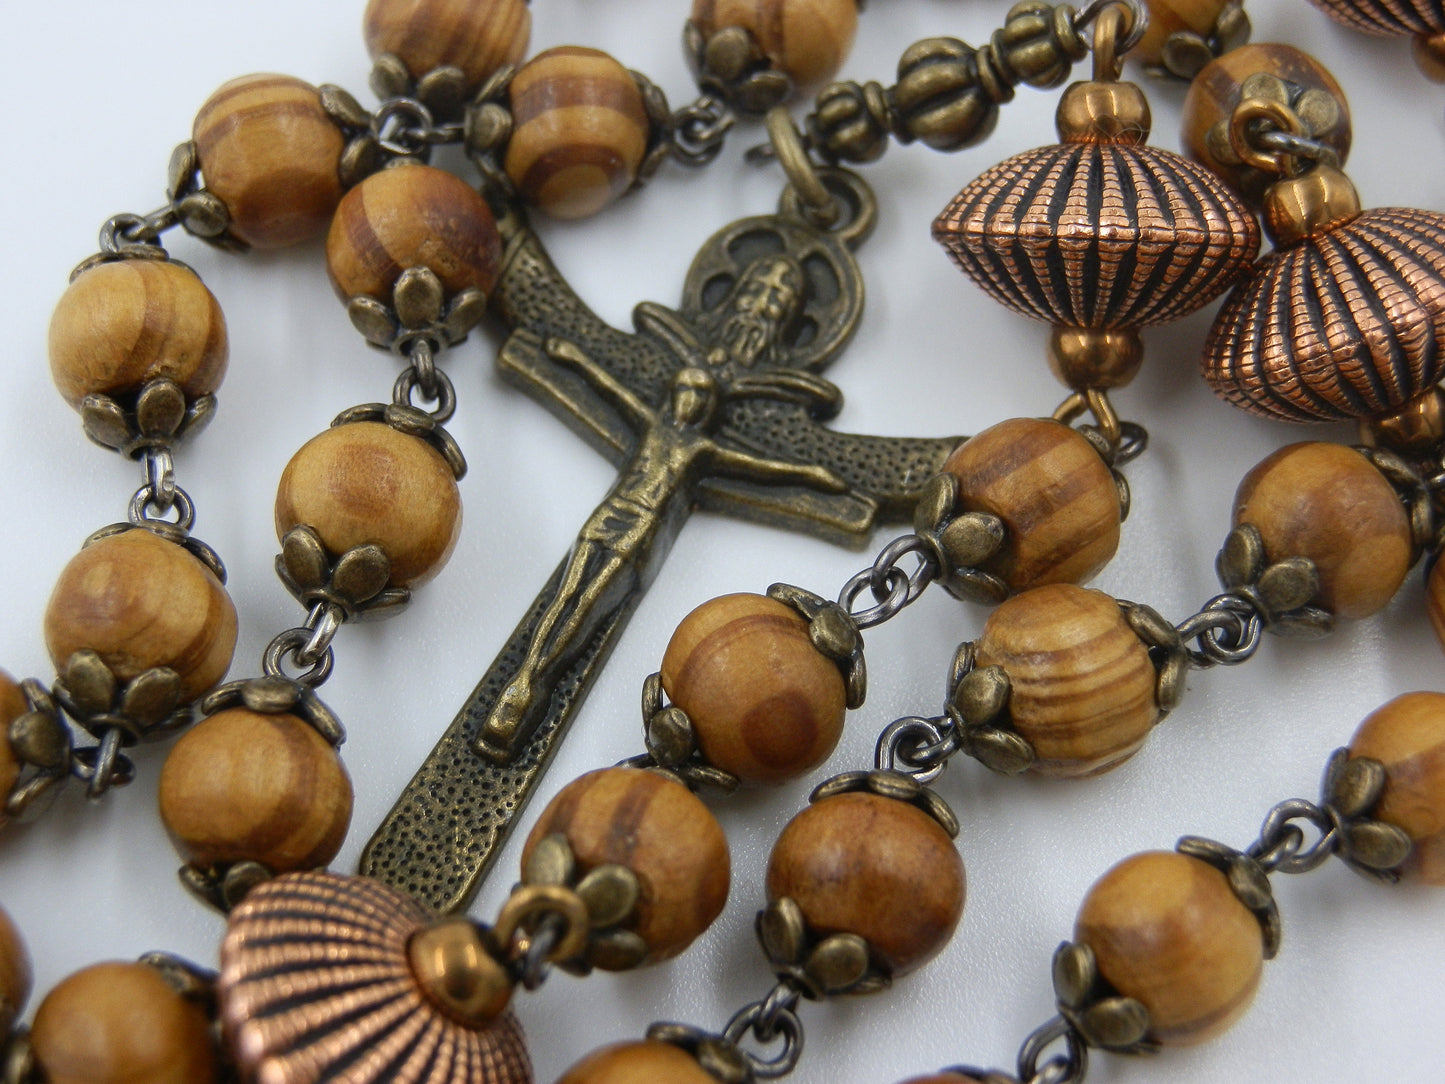 Vintage style wooden Holy Trinity Rosary beads, Crown of Thorns Rosary's, Holy Trinity Crucifix, Copper Our Father beads, Men's Rosay gift.